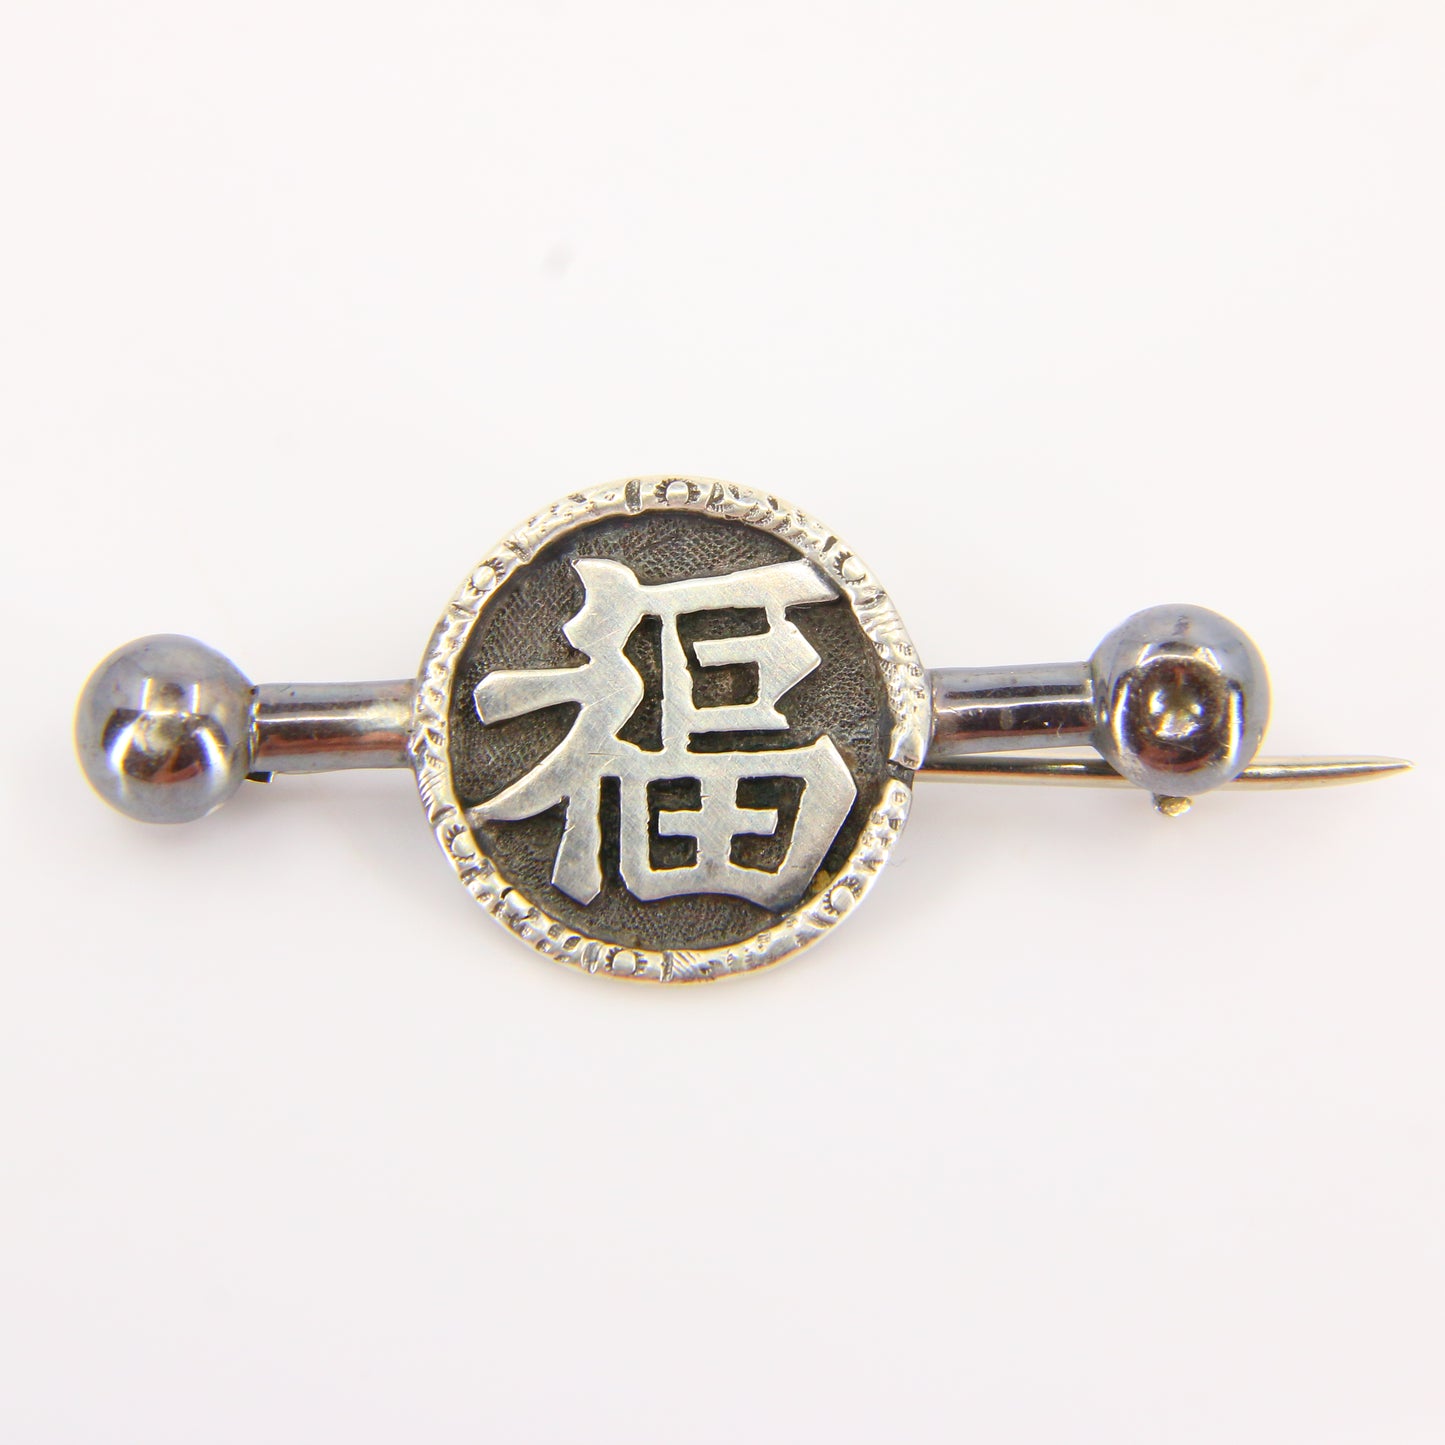 Vintage Silver Artisan Brooch Chinese "Blessing" Brooch Fine Jewellery